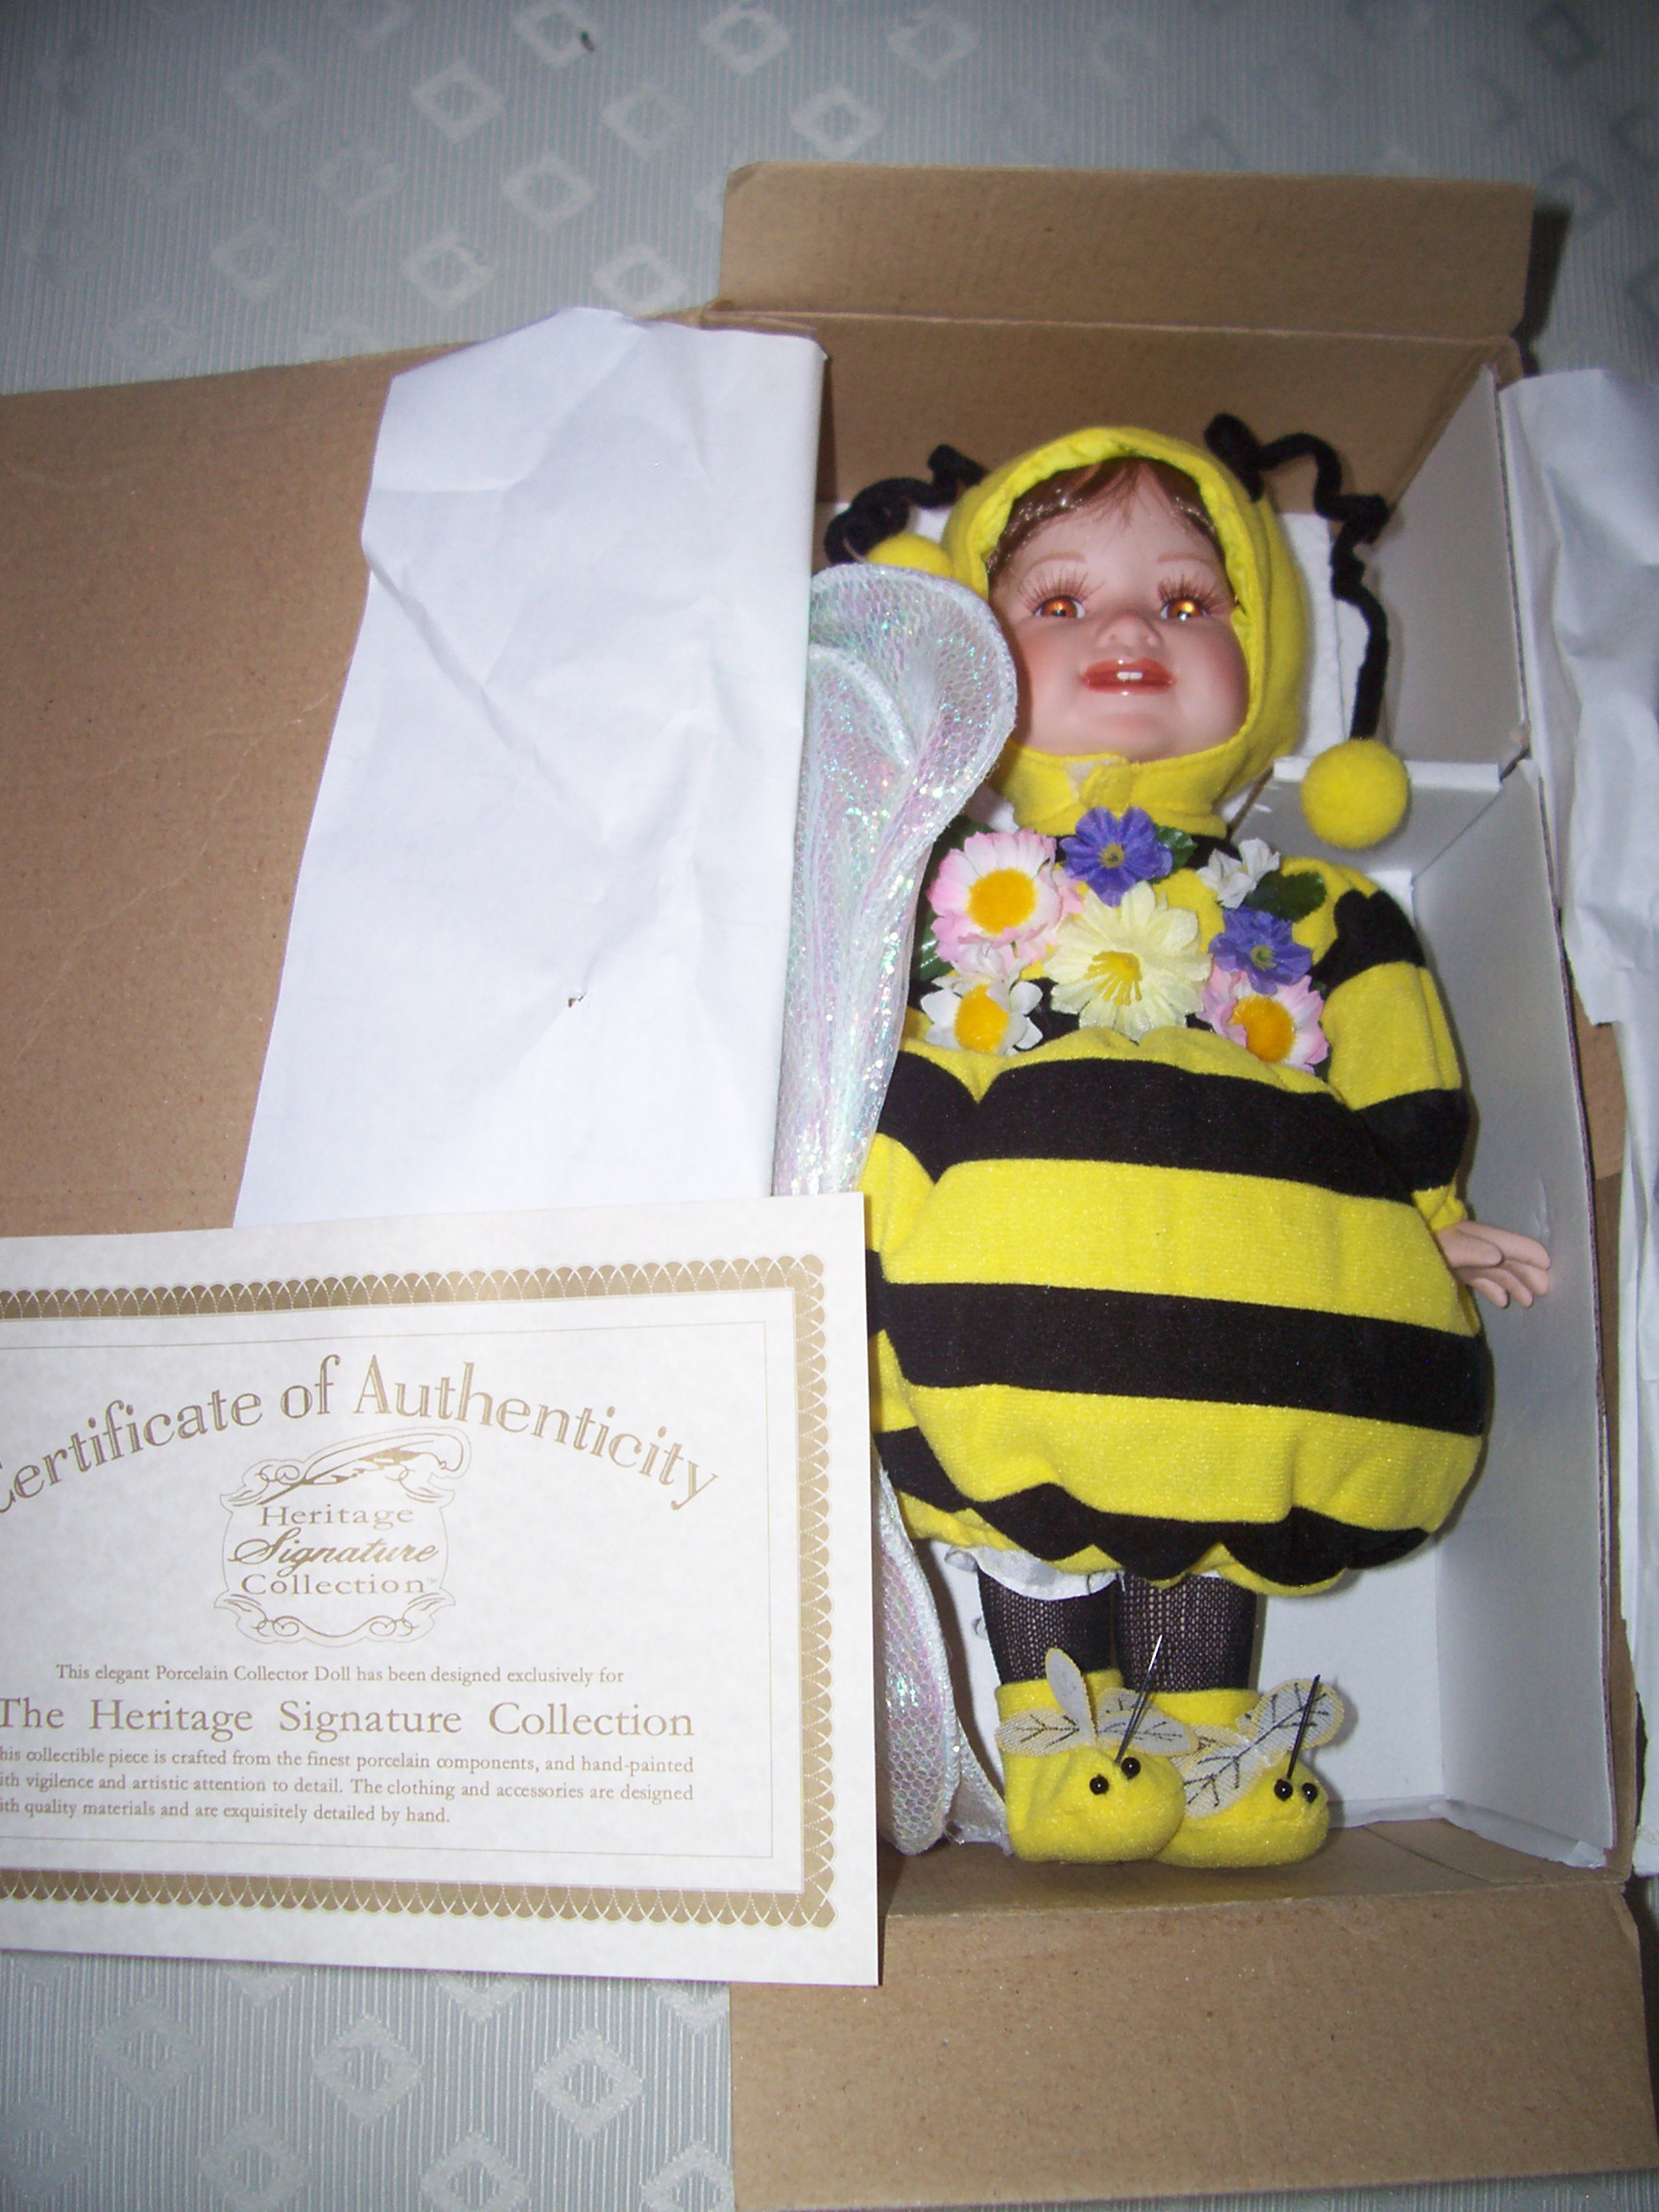 Heritage Signature Collection Bumble Bee Doll